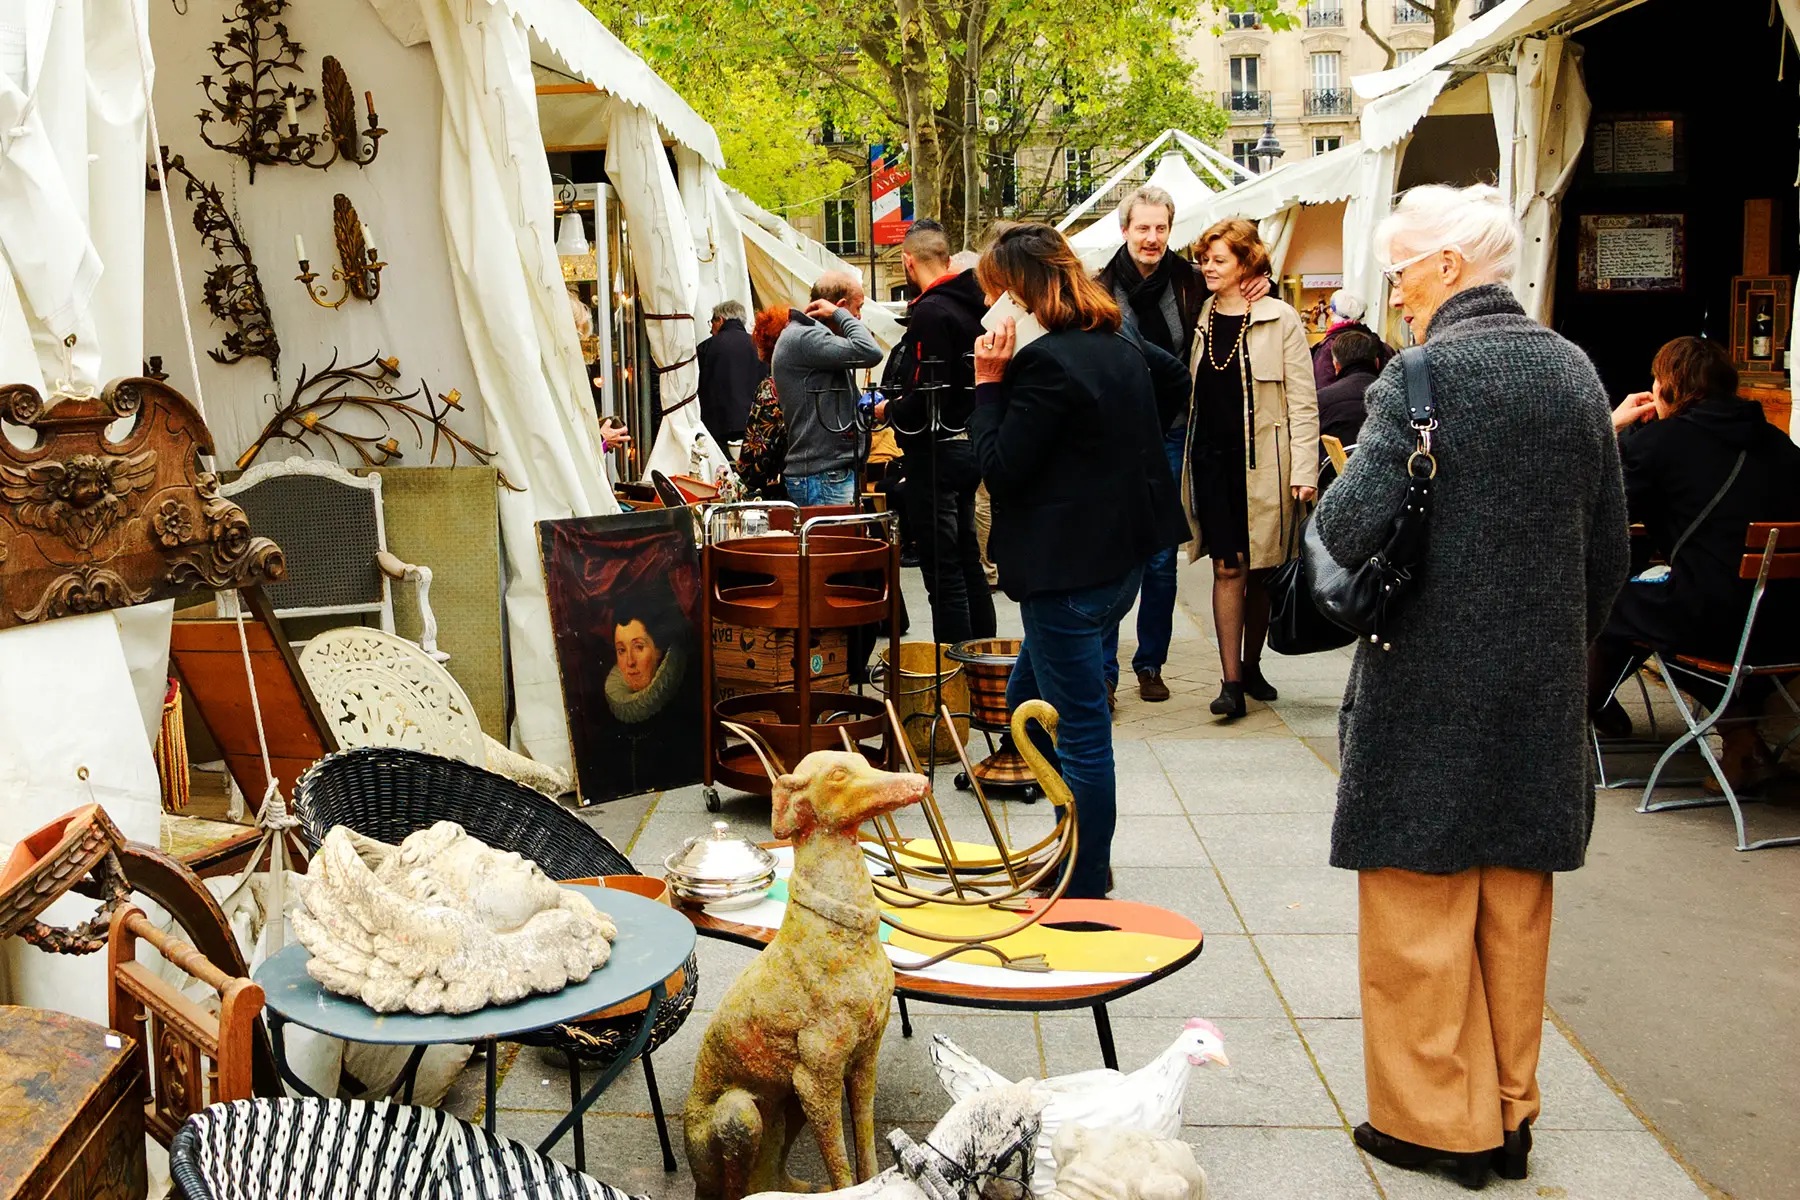 Household shopping in France: paint, plants, and more | Expatica